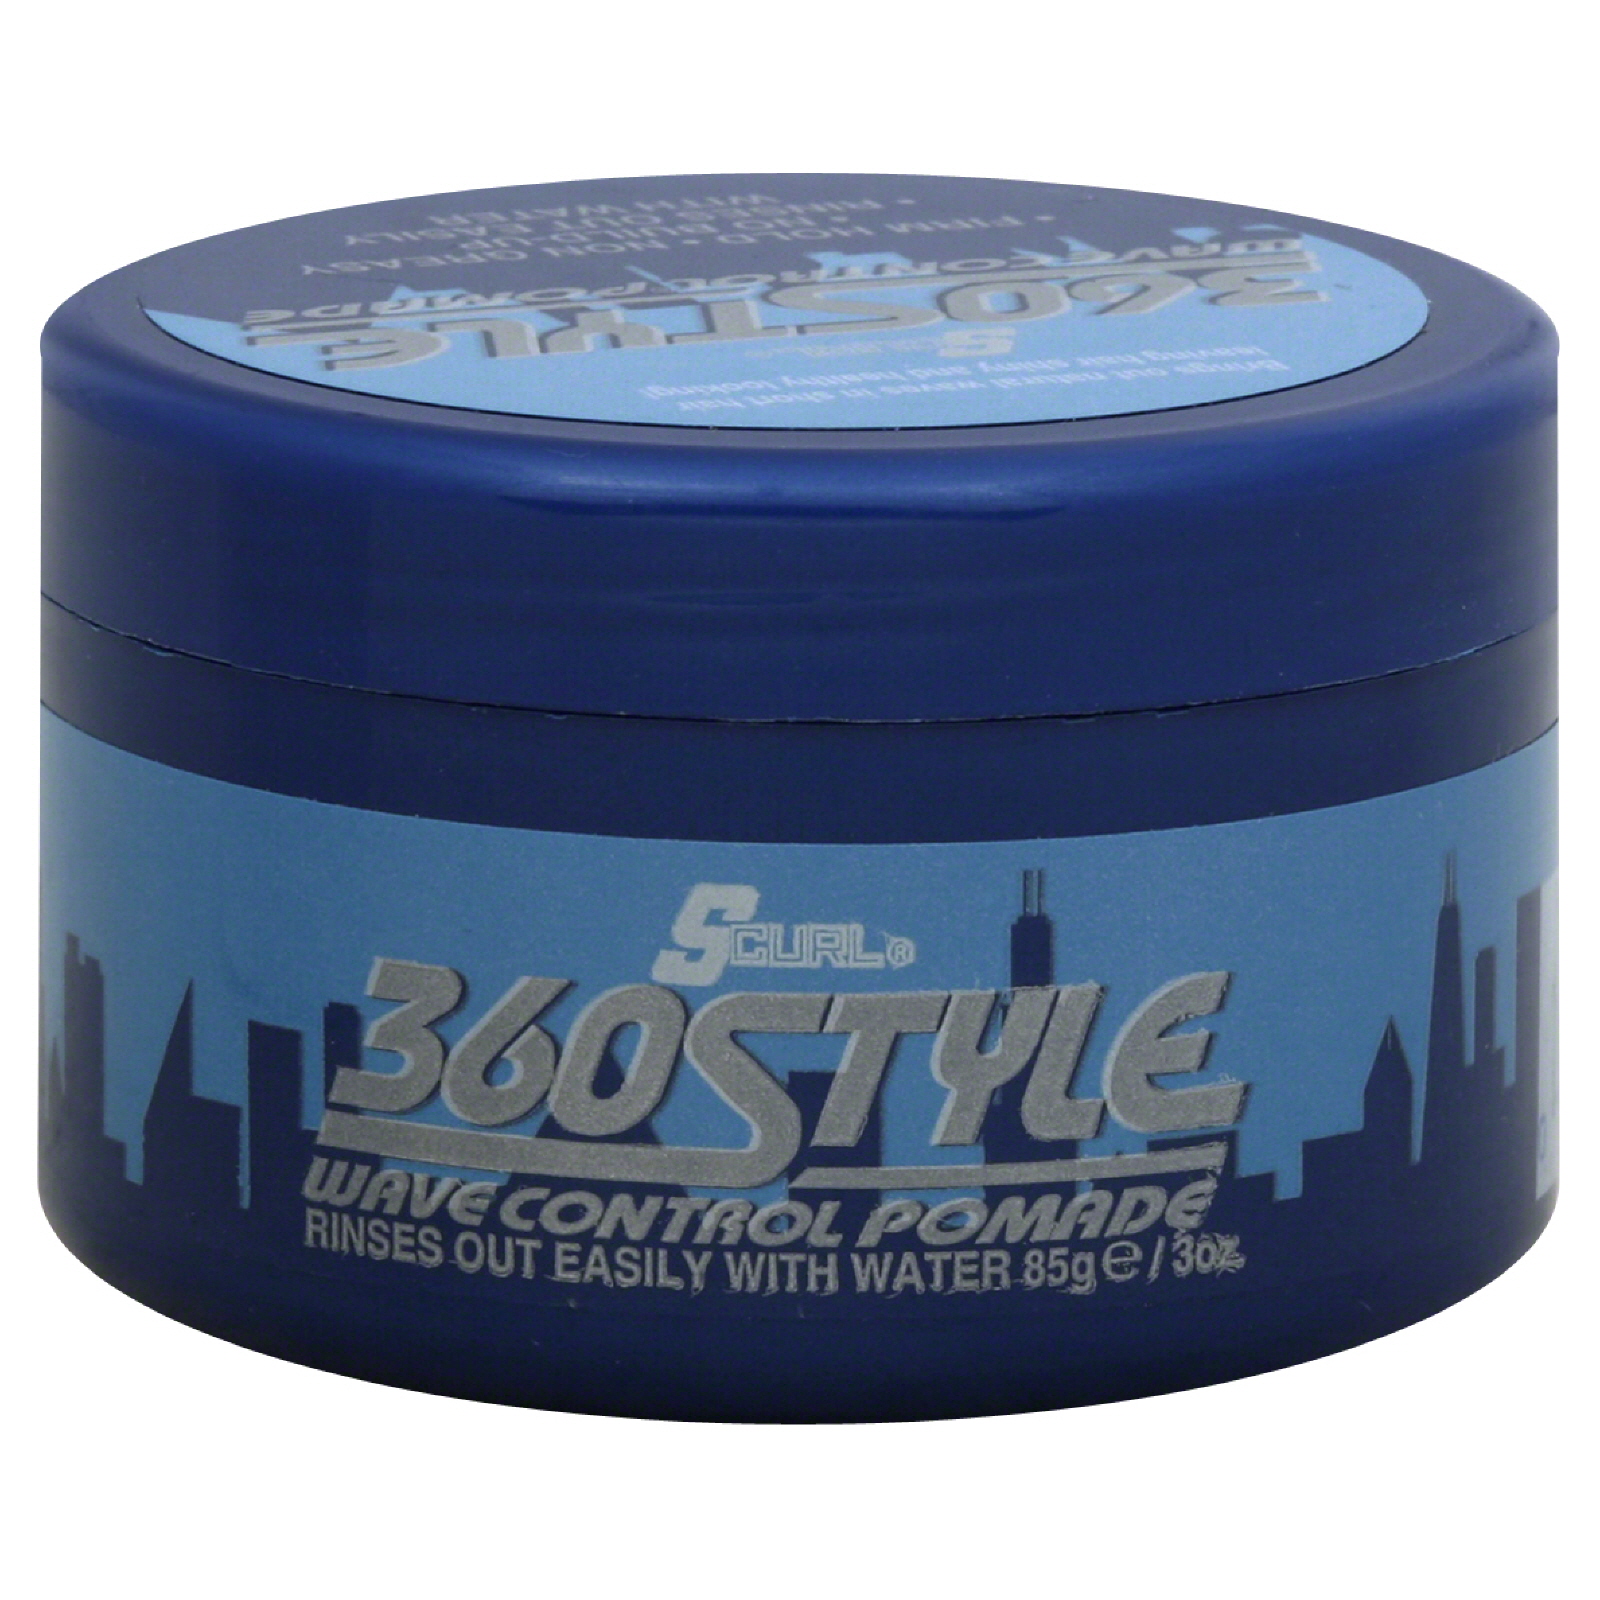 Luster's S-Curl Wave Control Pomade, 360 Style, 3 oz (85 g)